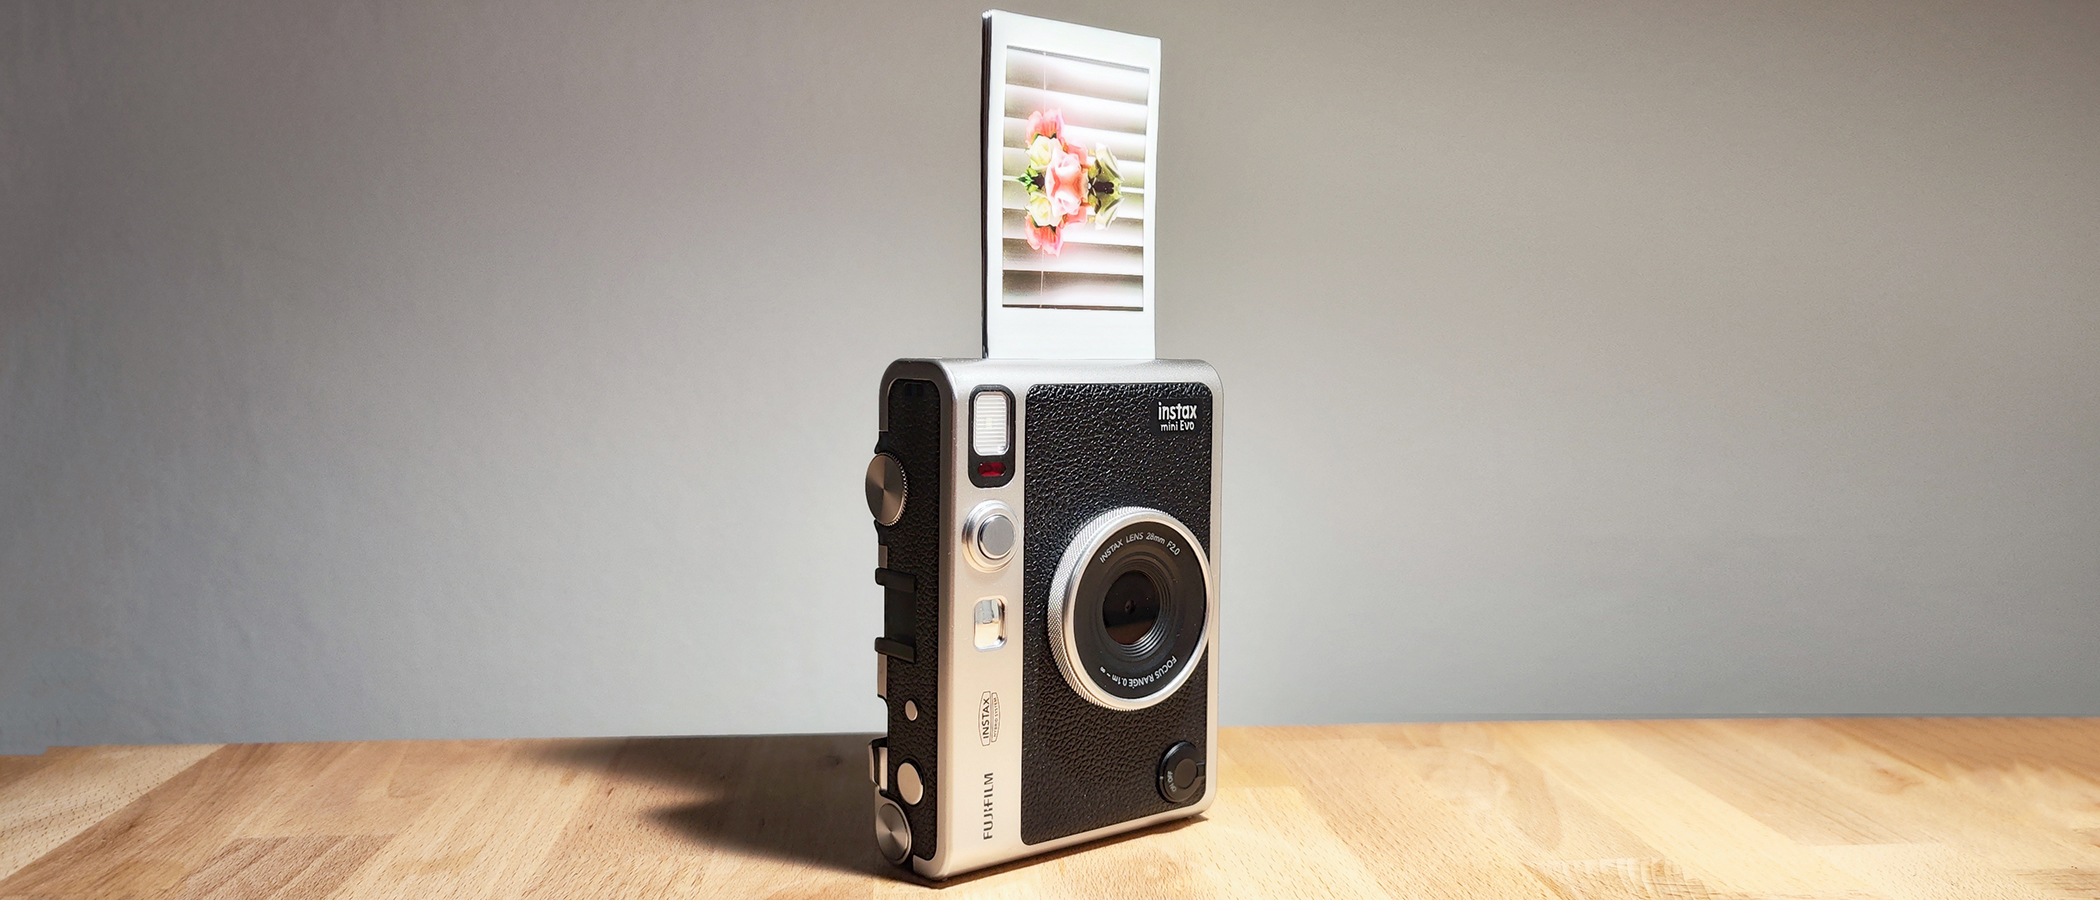 Hands-on with the new retro-chic Fujifilm Instax Mini 40: Digital  Photography Review